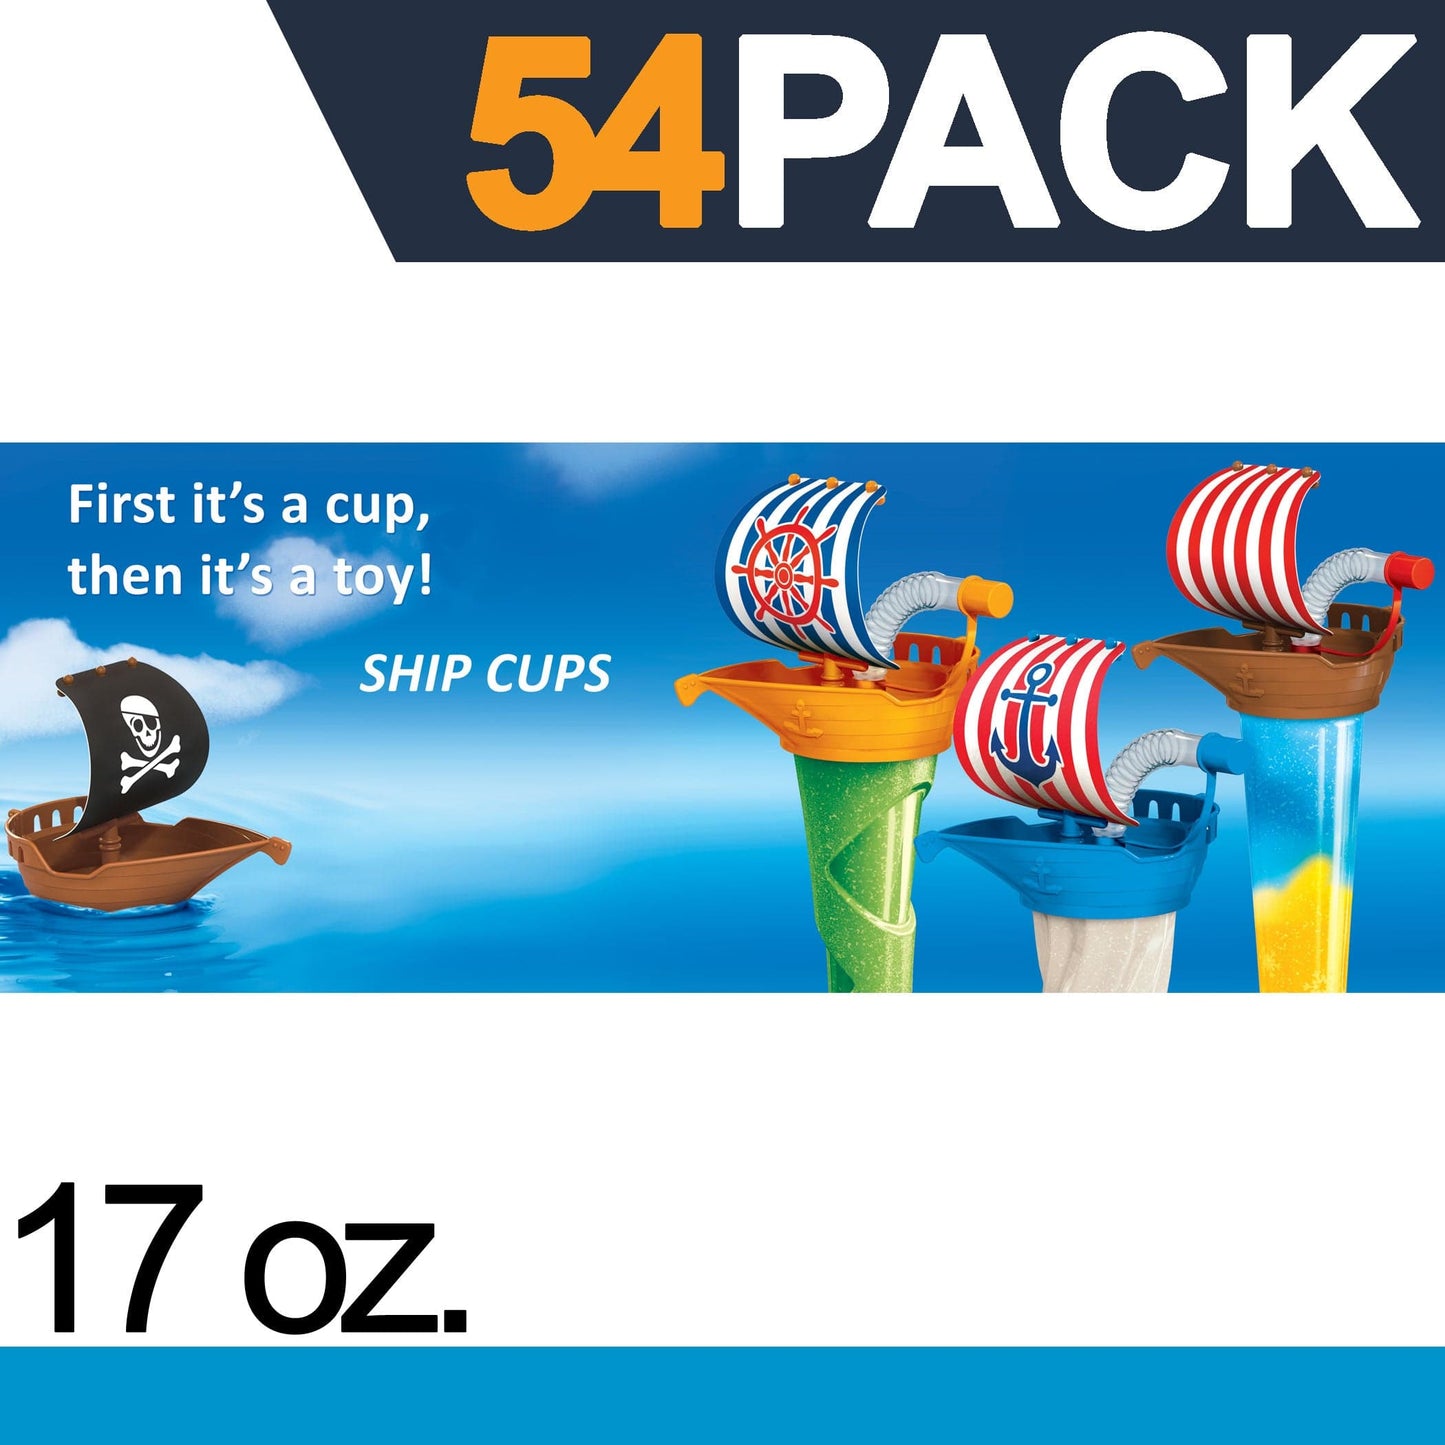 Sweet World USA Yard Cups (54 Cups) Gasparilla Pirate Ship Cups - 17oz/500ml - for Cold or Frozen Drinks, Kids Parties - First it's a Cup, then it's a Toy cups with lids and straws